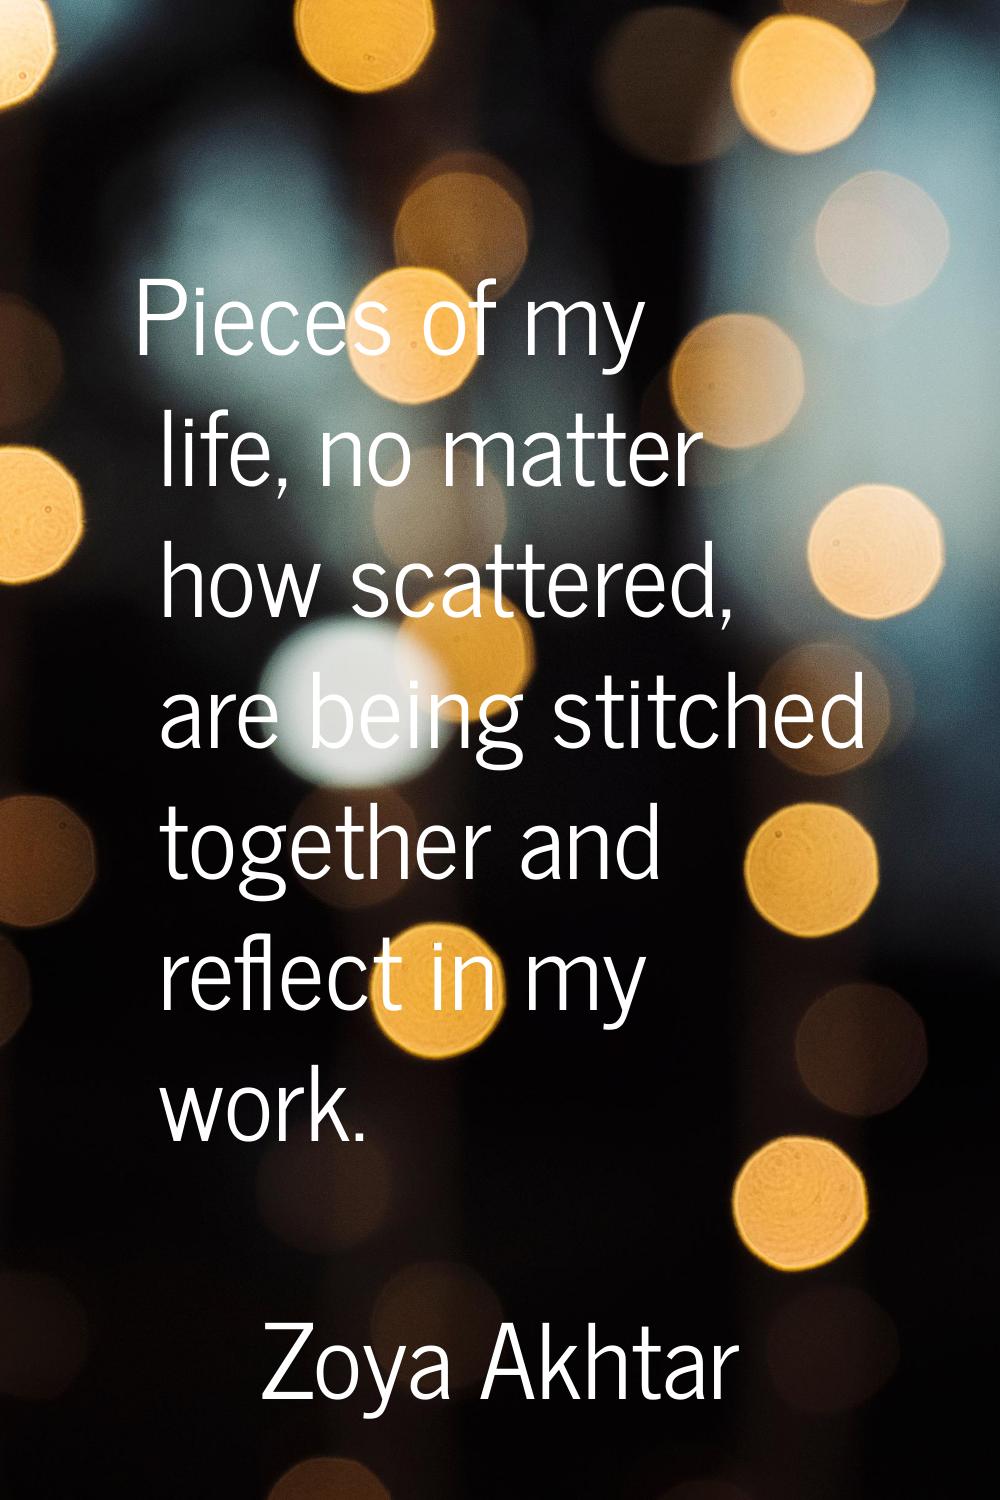 Pieces of my life, no matter how scattered, are being stitched together and reflect in my work.